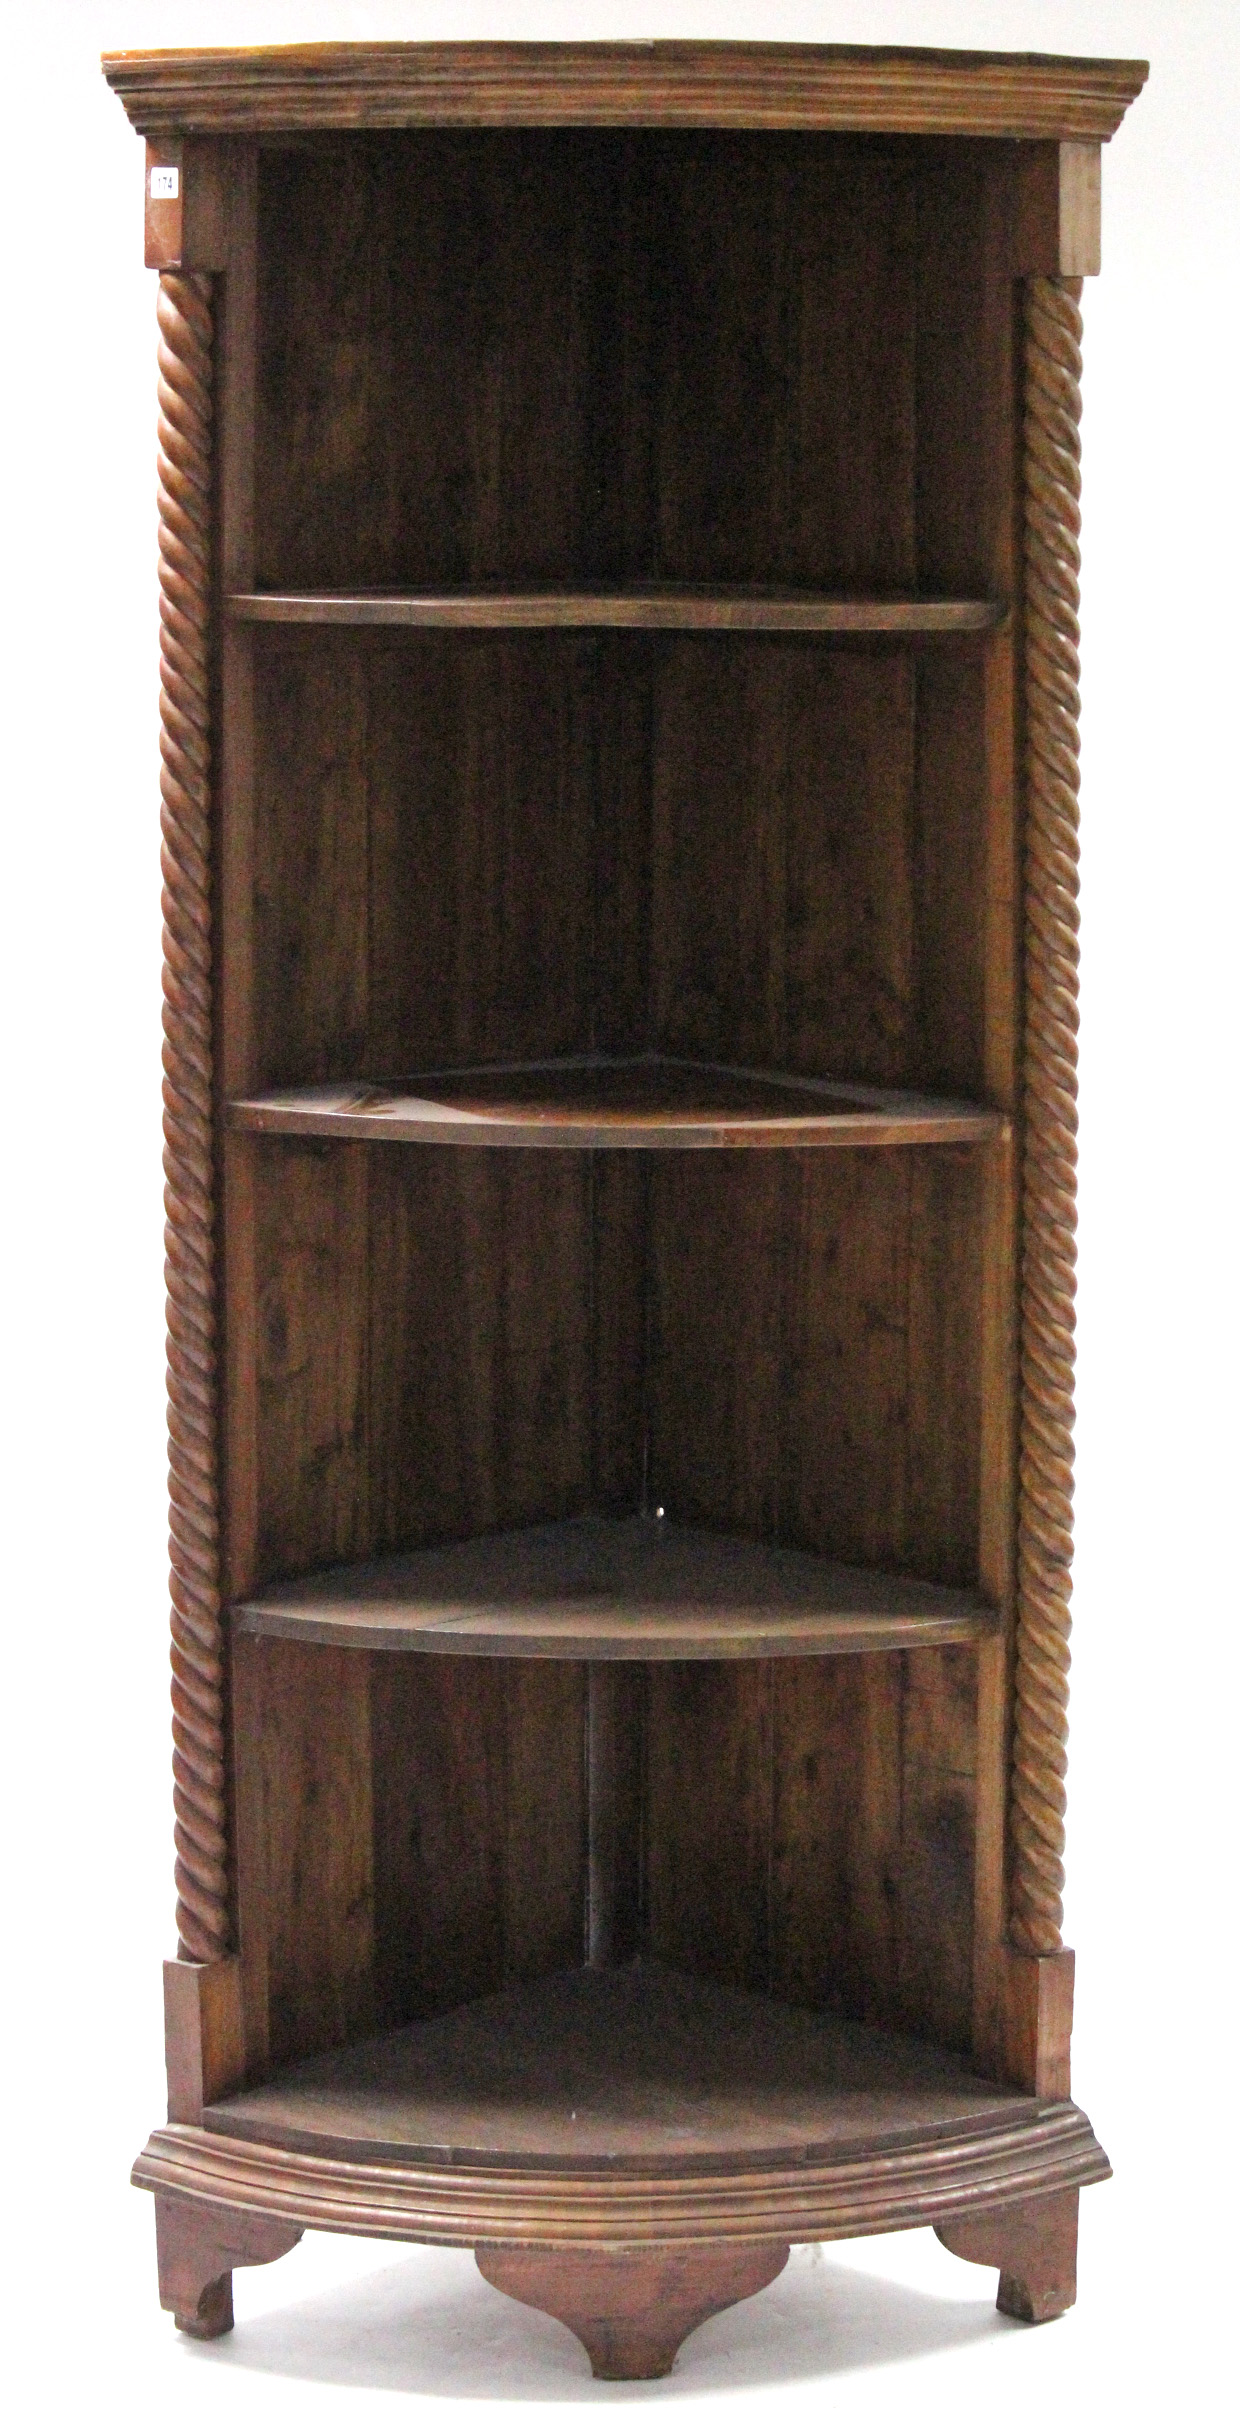 A teak tall standing four-tier open corner bookcase with spiral-twist pilasters, & on bracket